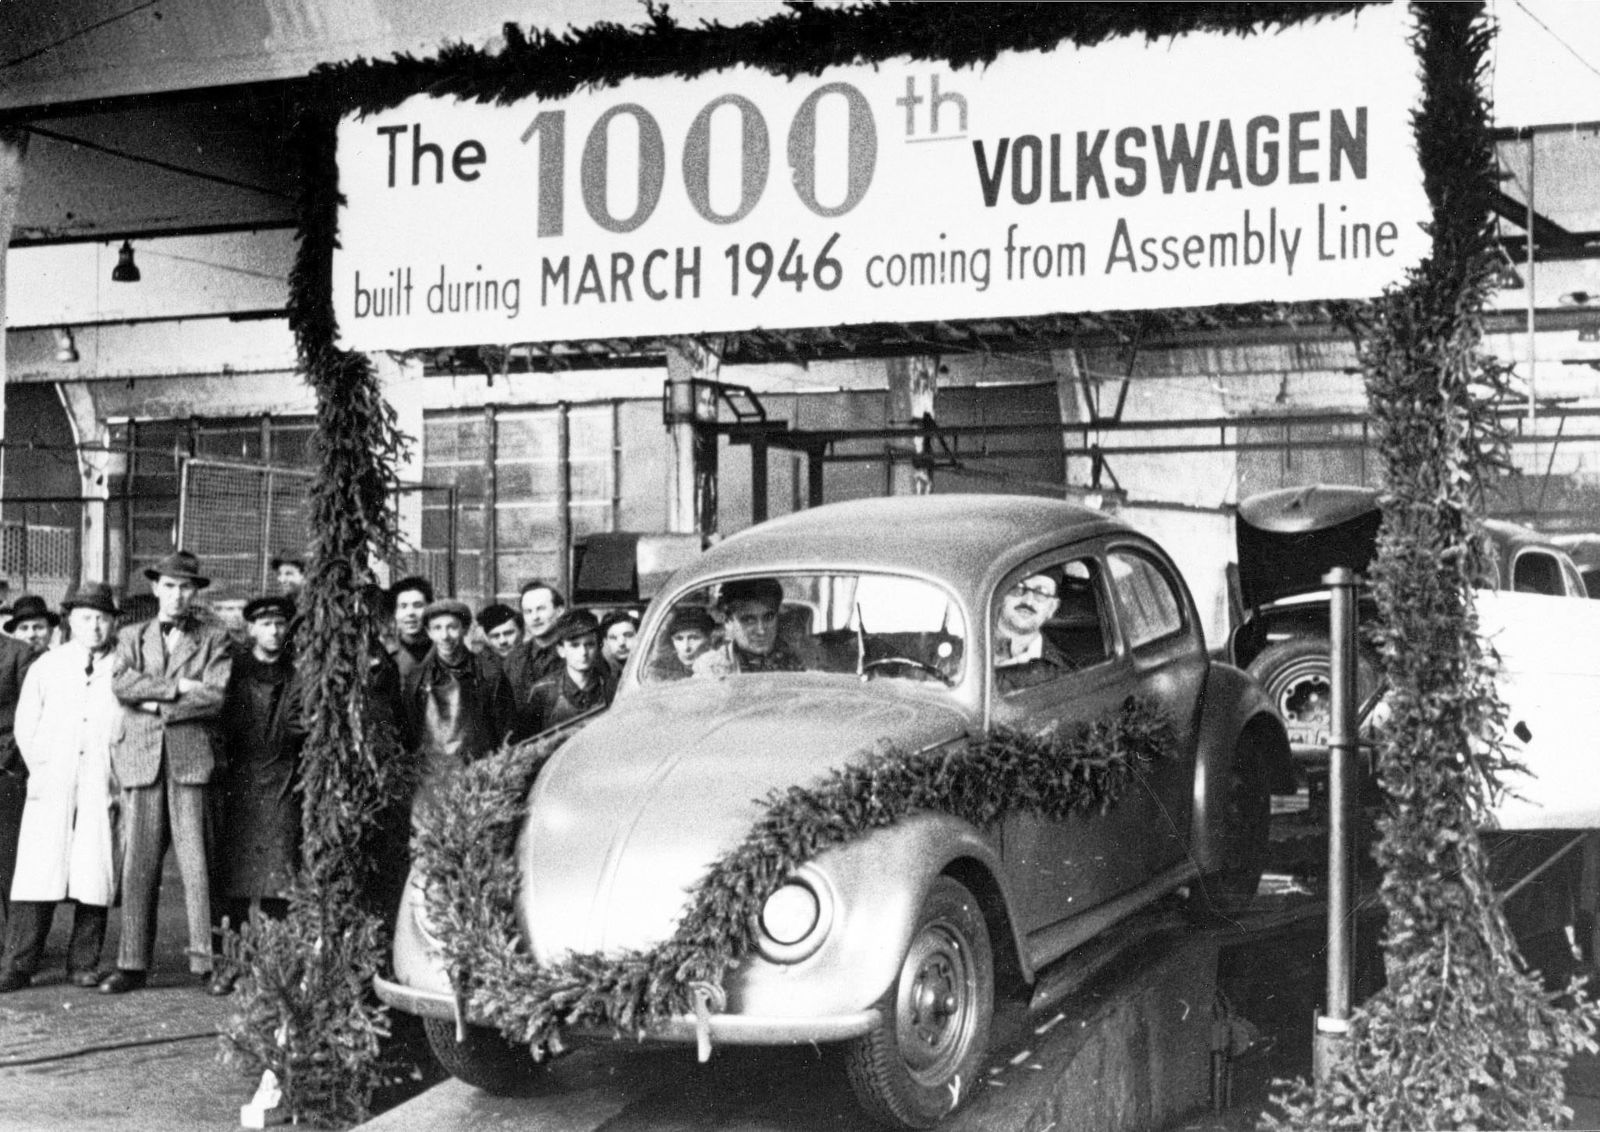 70 years ago, the United Kingdom handed over trusteeship of Volkswagen to the Federal Republic of Germany